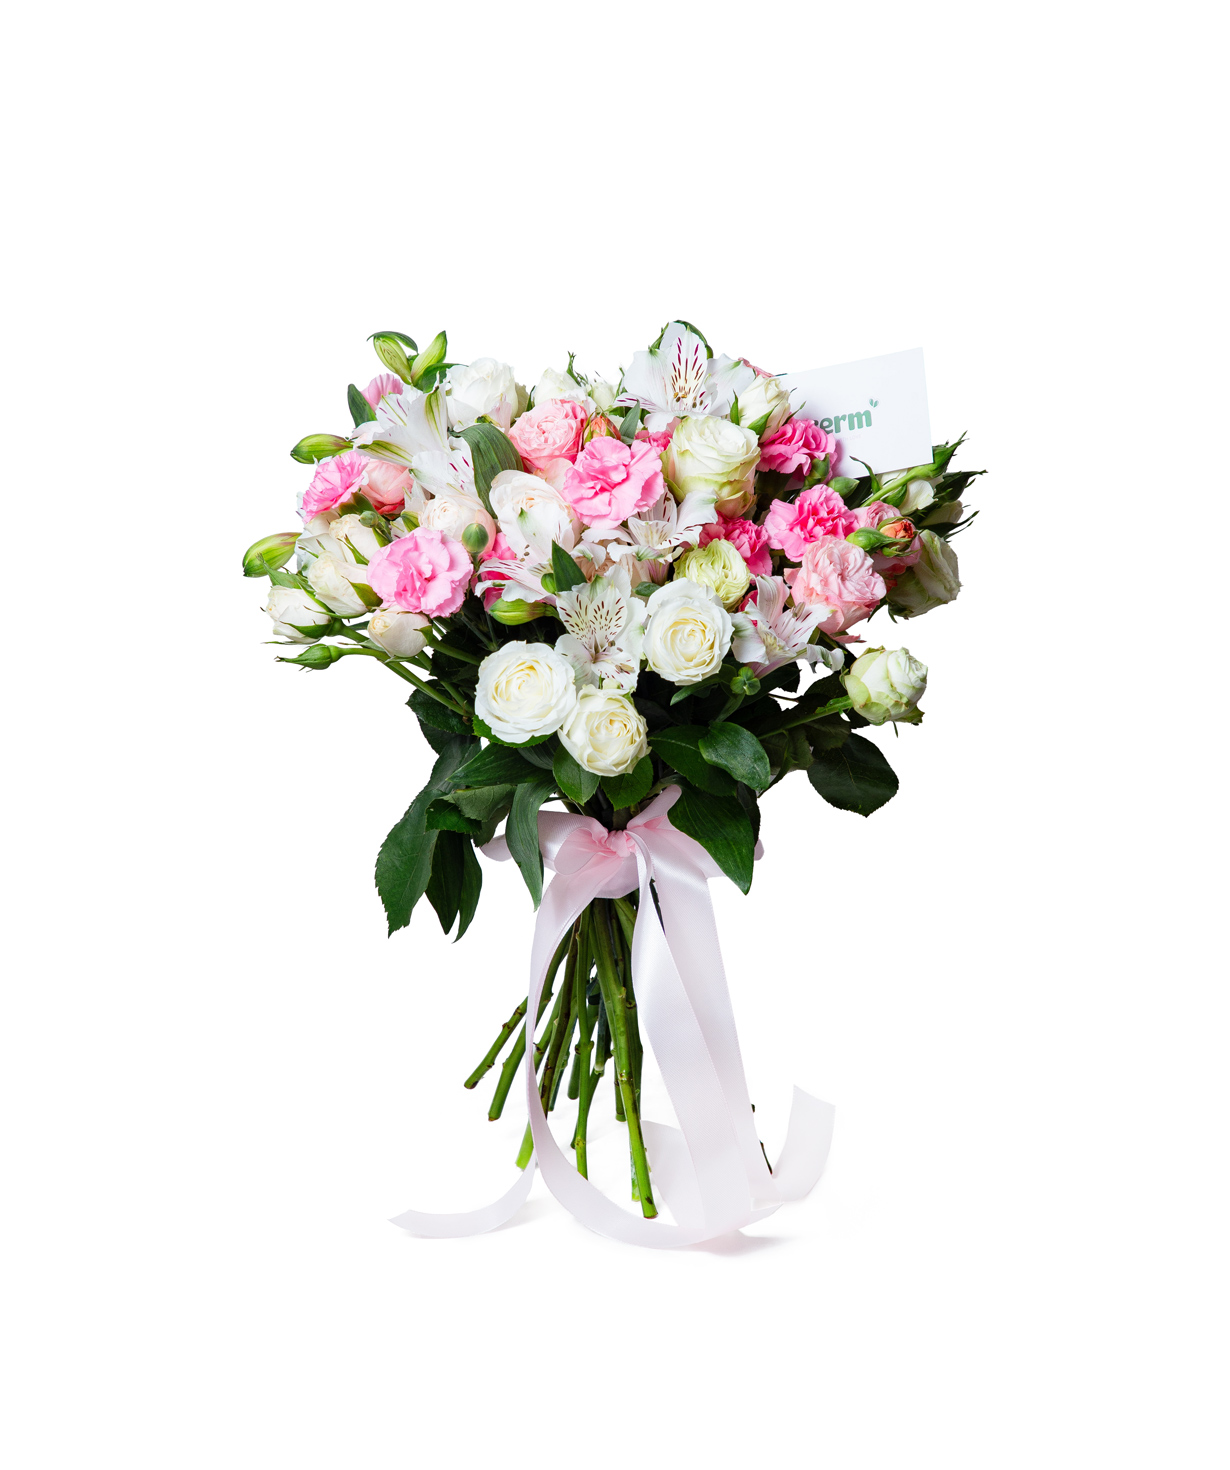 Bouquet «Thirasia» with spray roses and alstroemerias